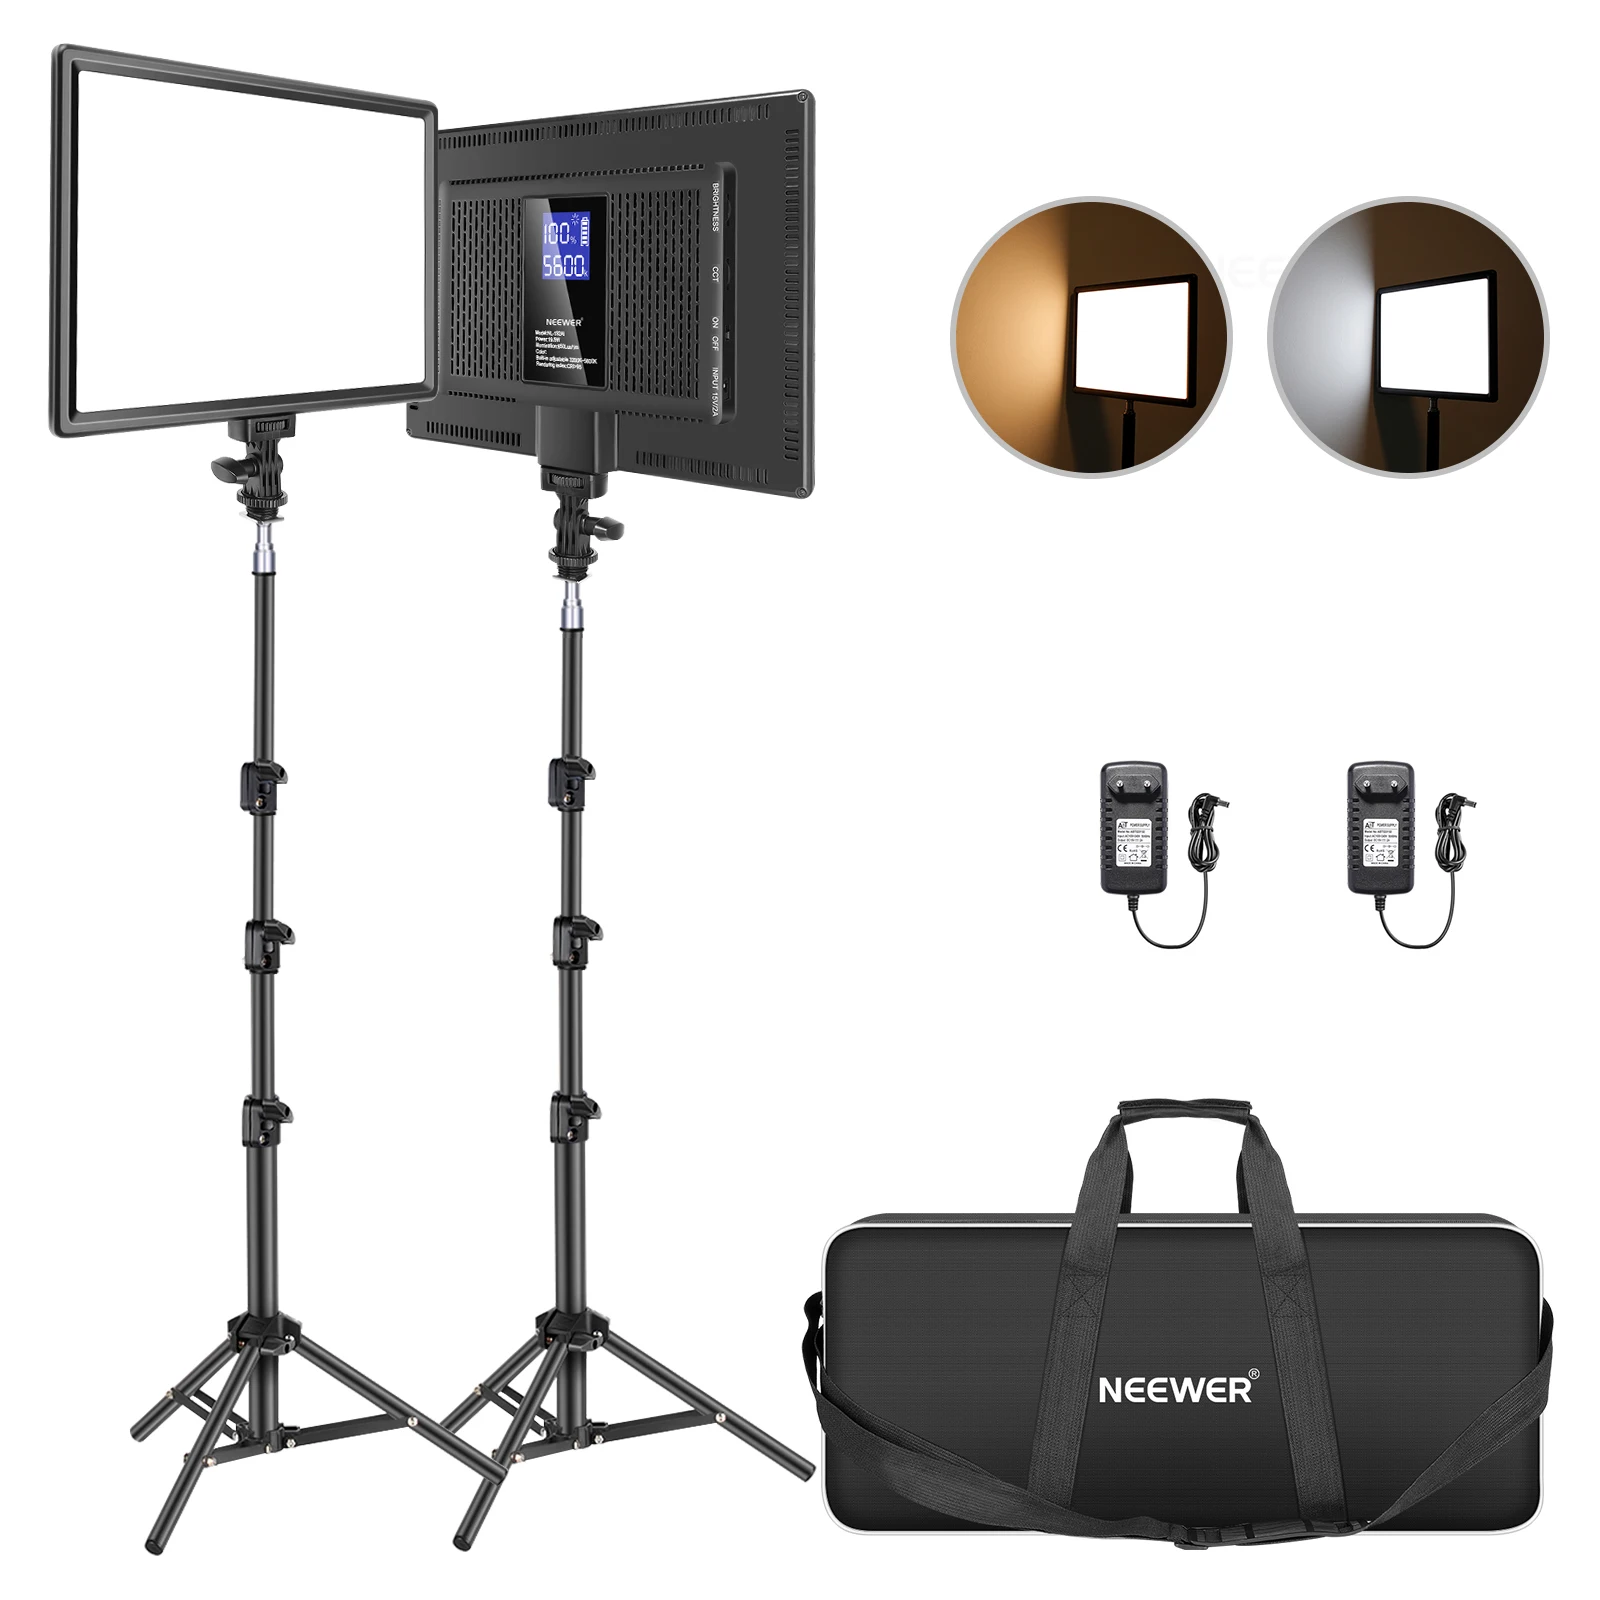 

Neewer Dimmable Led Video Panel Photography Kit, 2-Pack 12.9inch Bi-Color With Light Stand For Game/Live Stream/YouTube